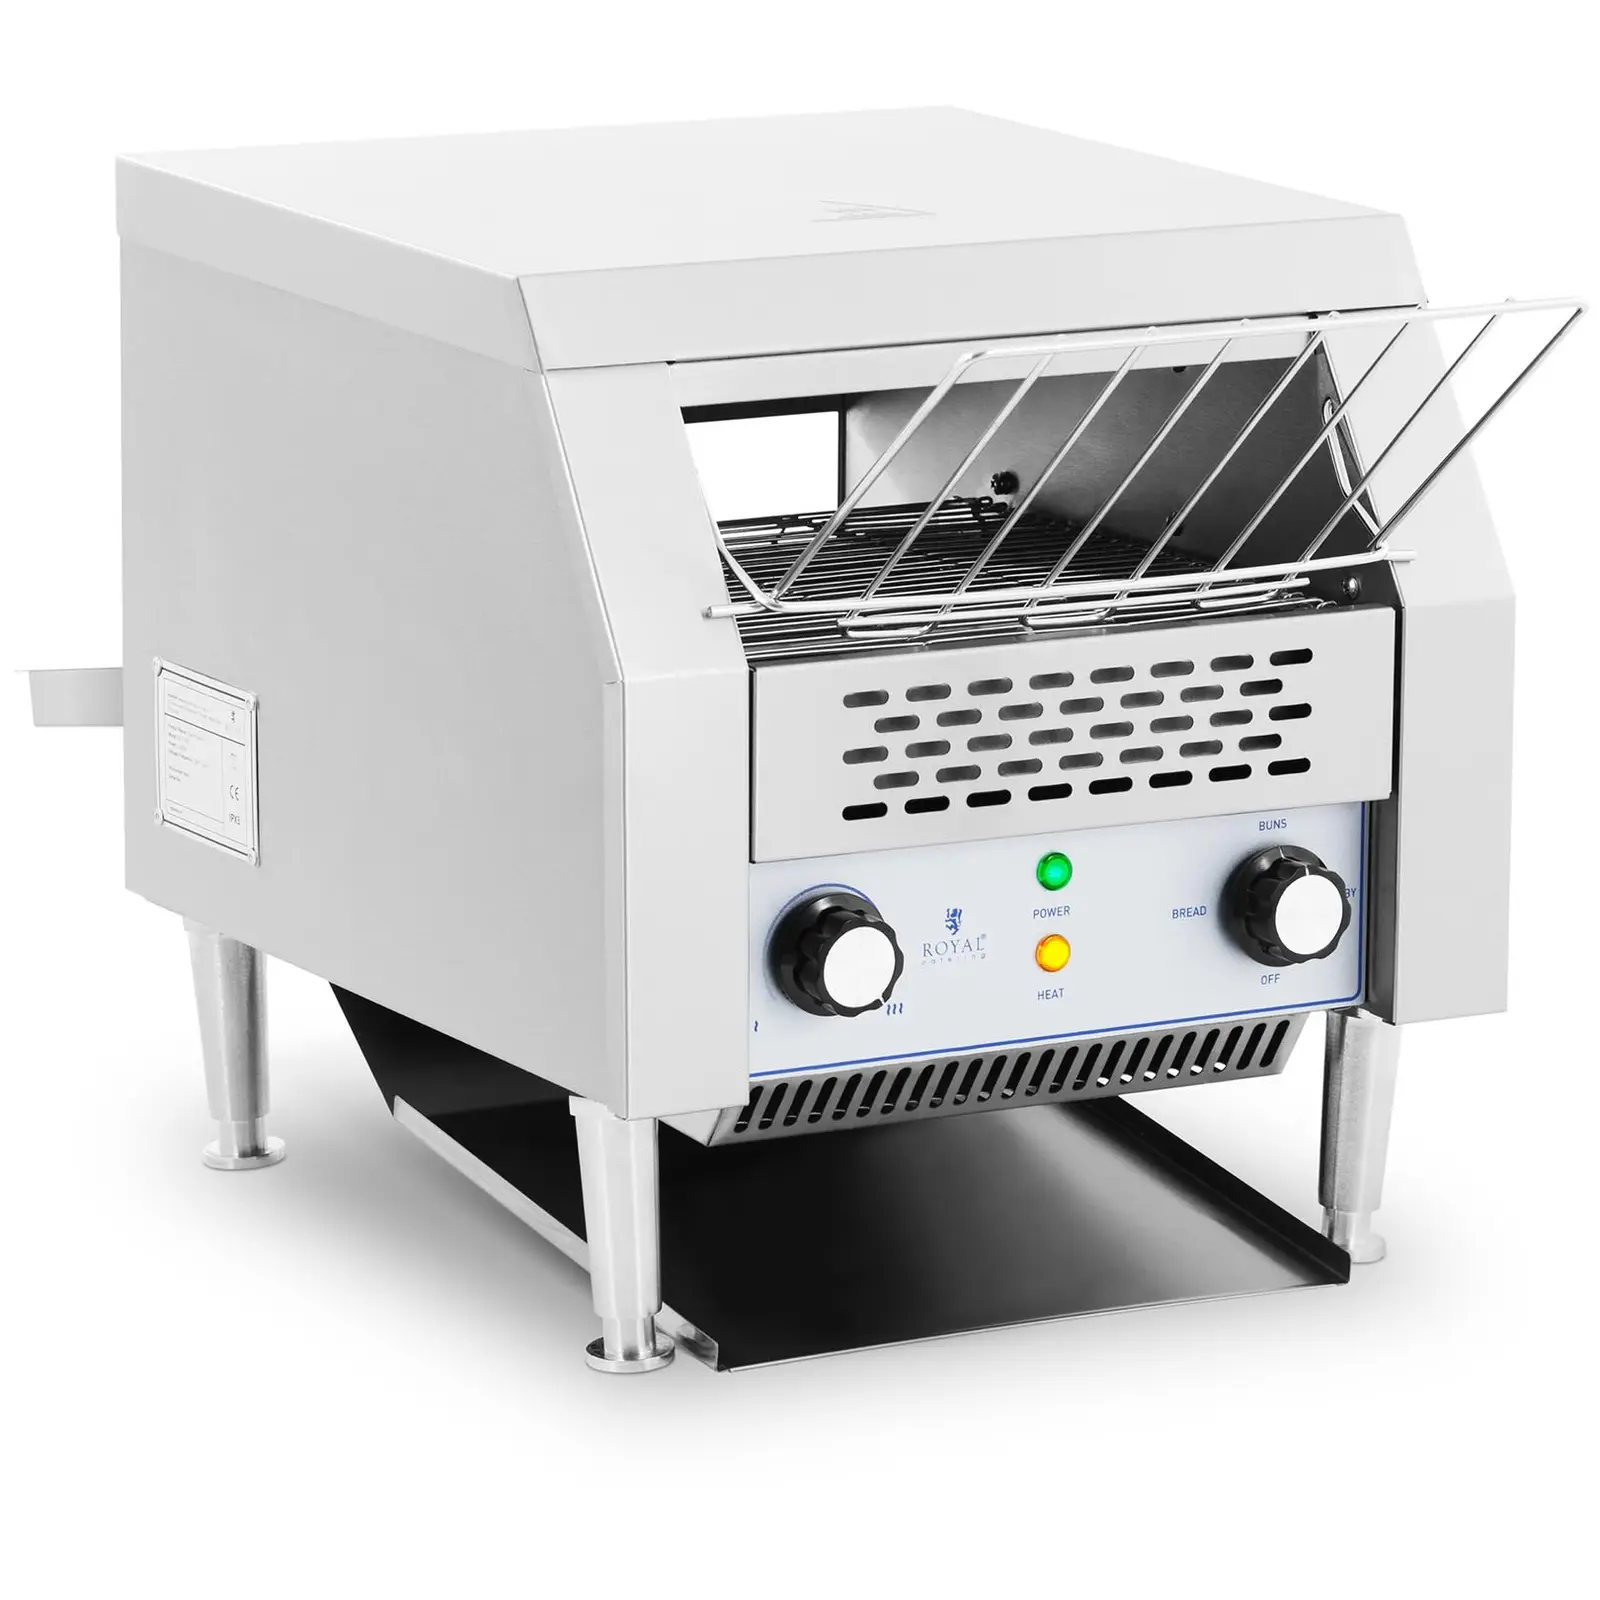 Durchlauftoaster - 2,200 W- Royal Catering - 3 Funktionen